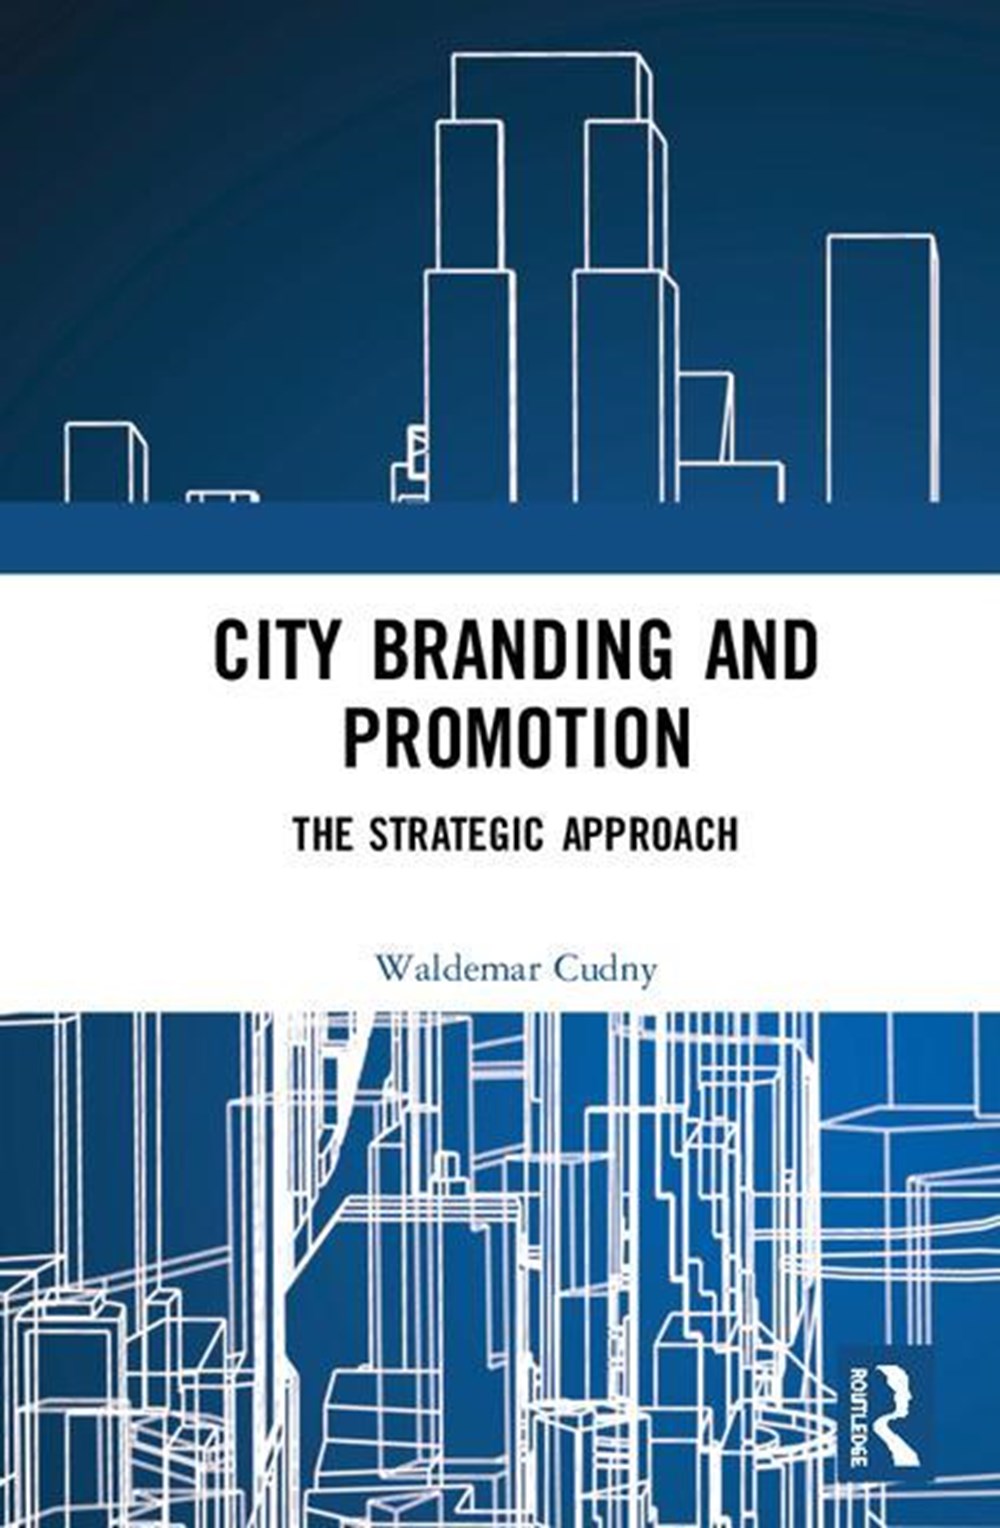 City Branding and Promotion: The Strategic Approach